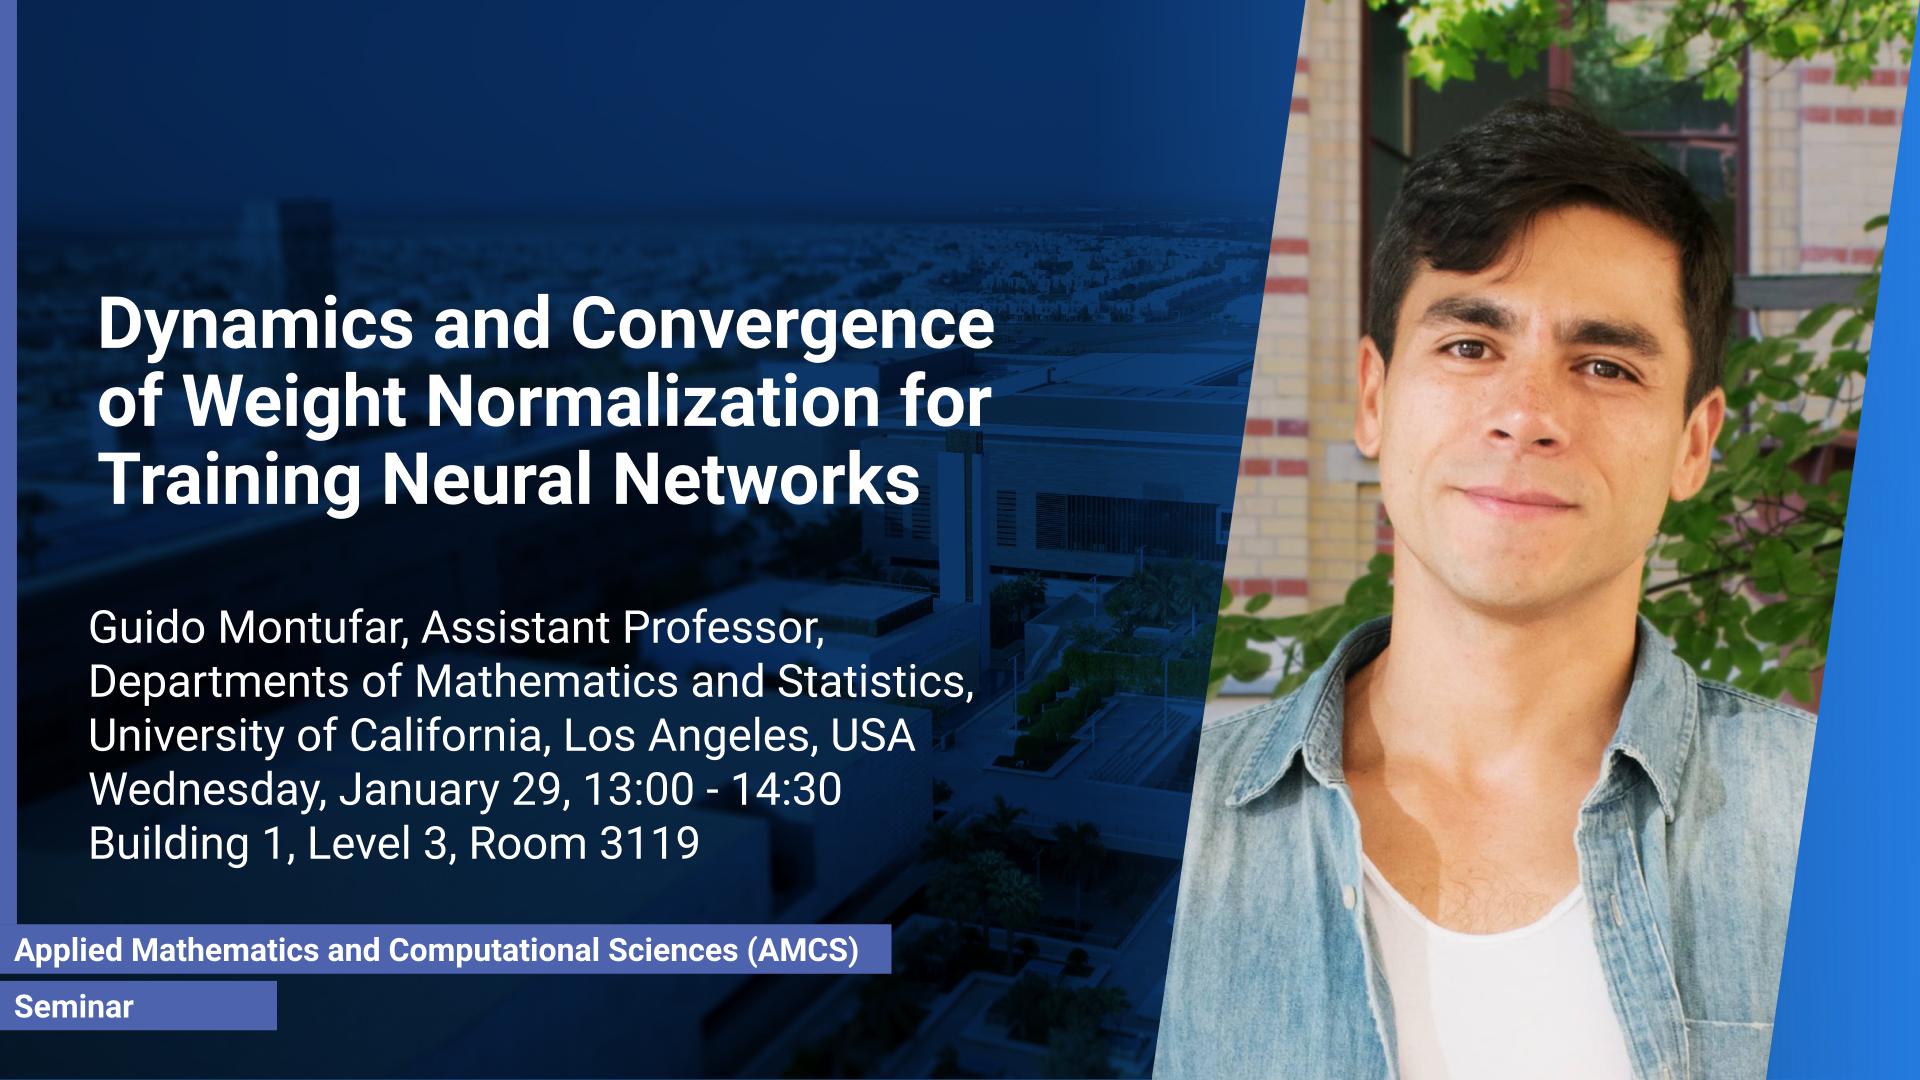 KAUST CEMSE AMCS Seminar Guido Montufar Dynamics and Convergence of Weight Normalization for Training Neural Networks